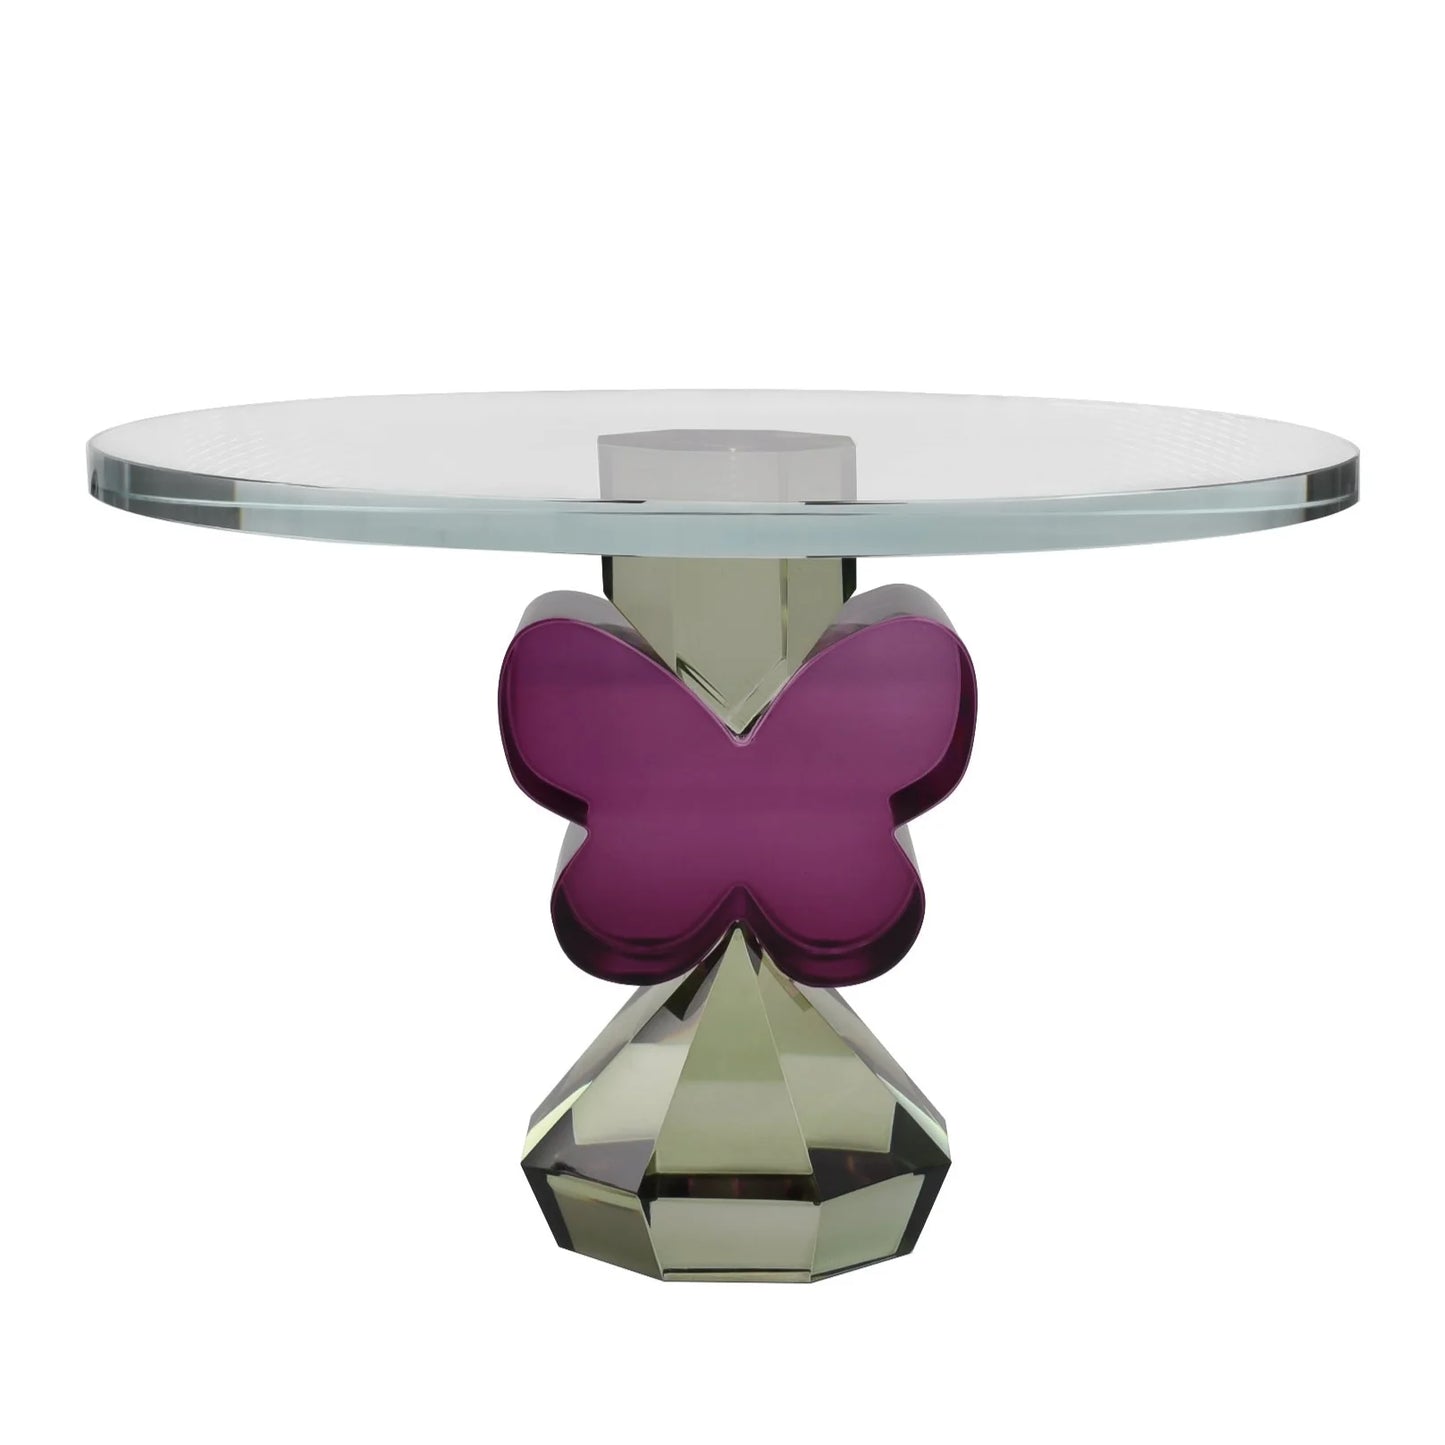 Crystal Butterfly Cake Plate - Plum/Green